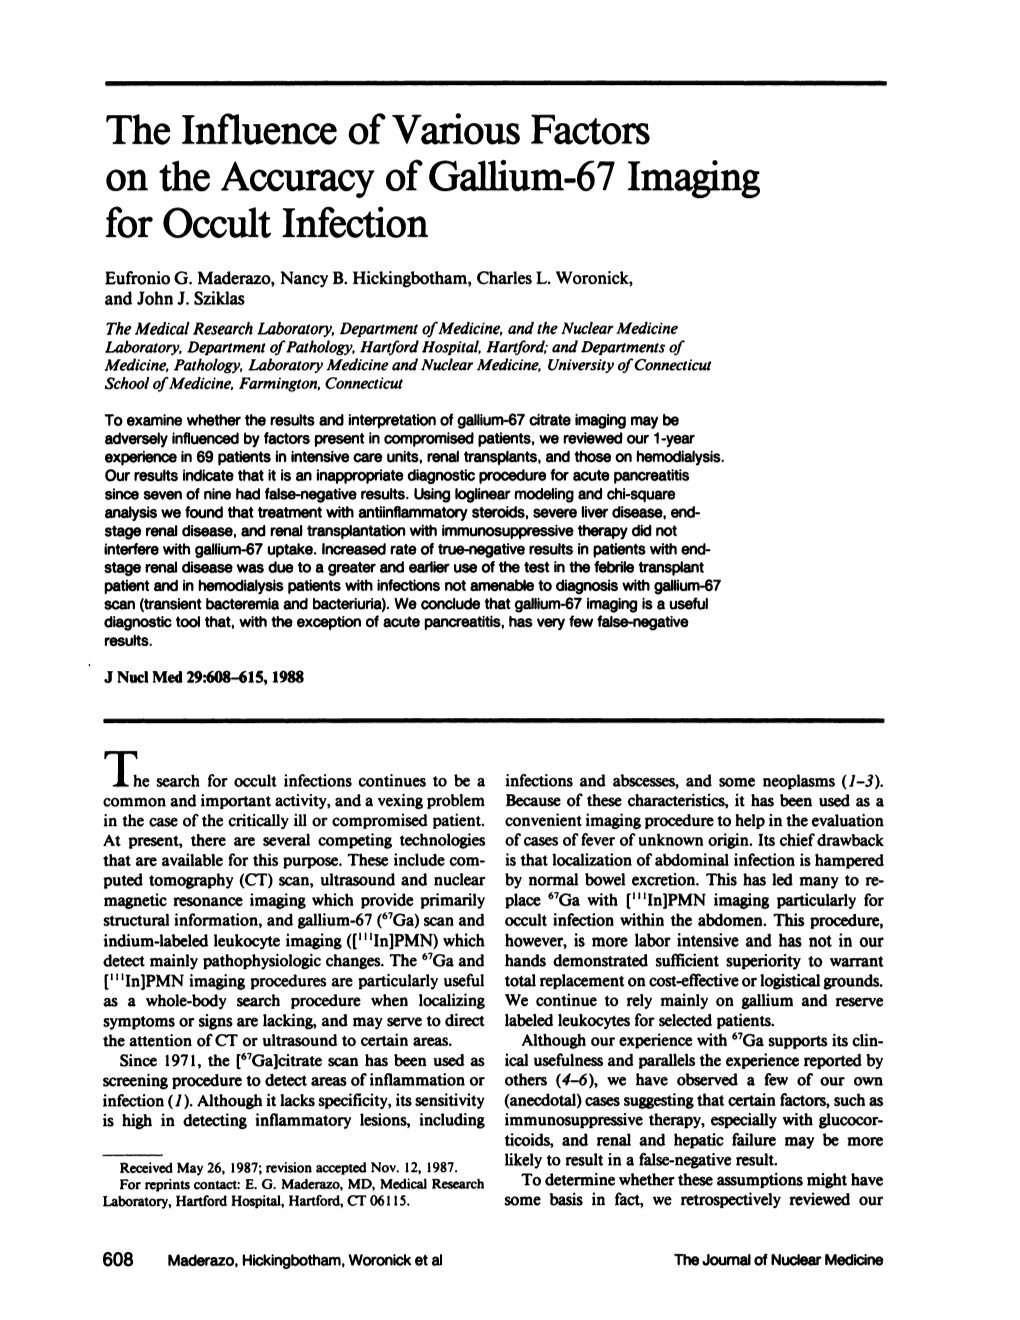 The Influence of Various Factors on the Accuracy of Gaffium-67 Imaging for Occult Infection